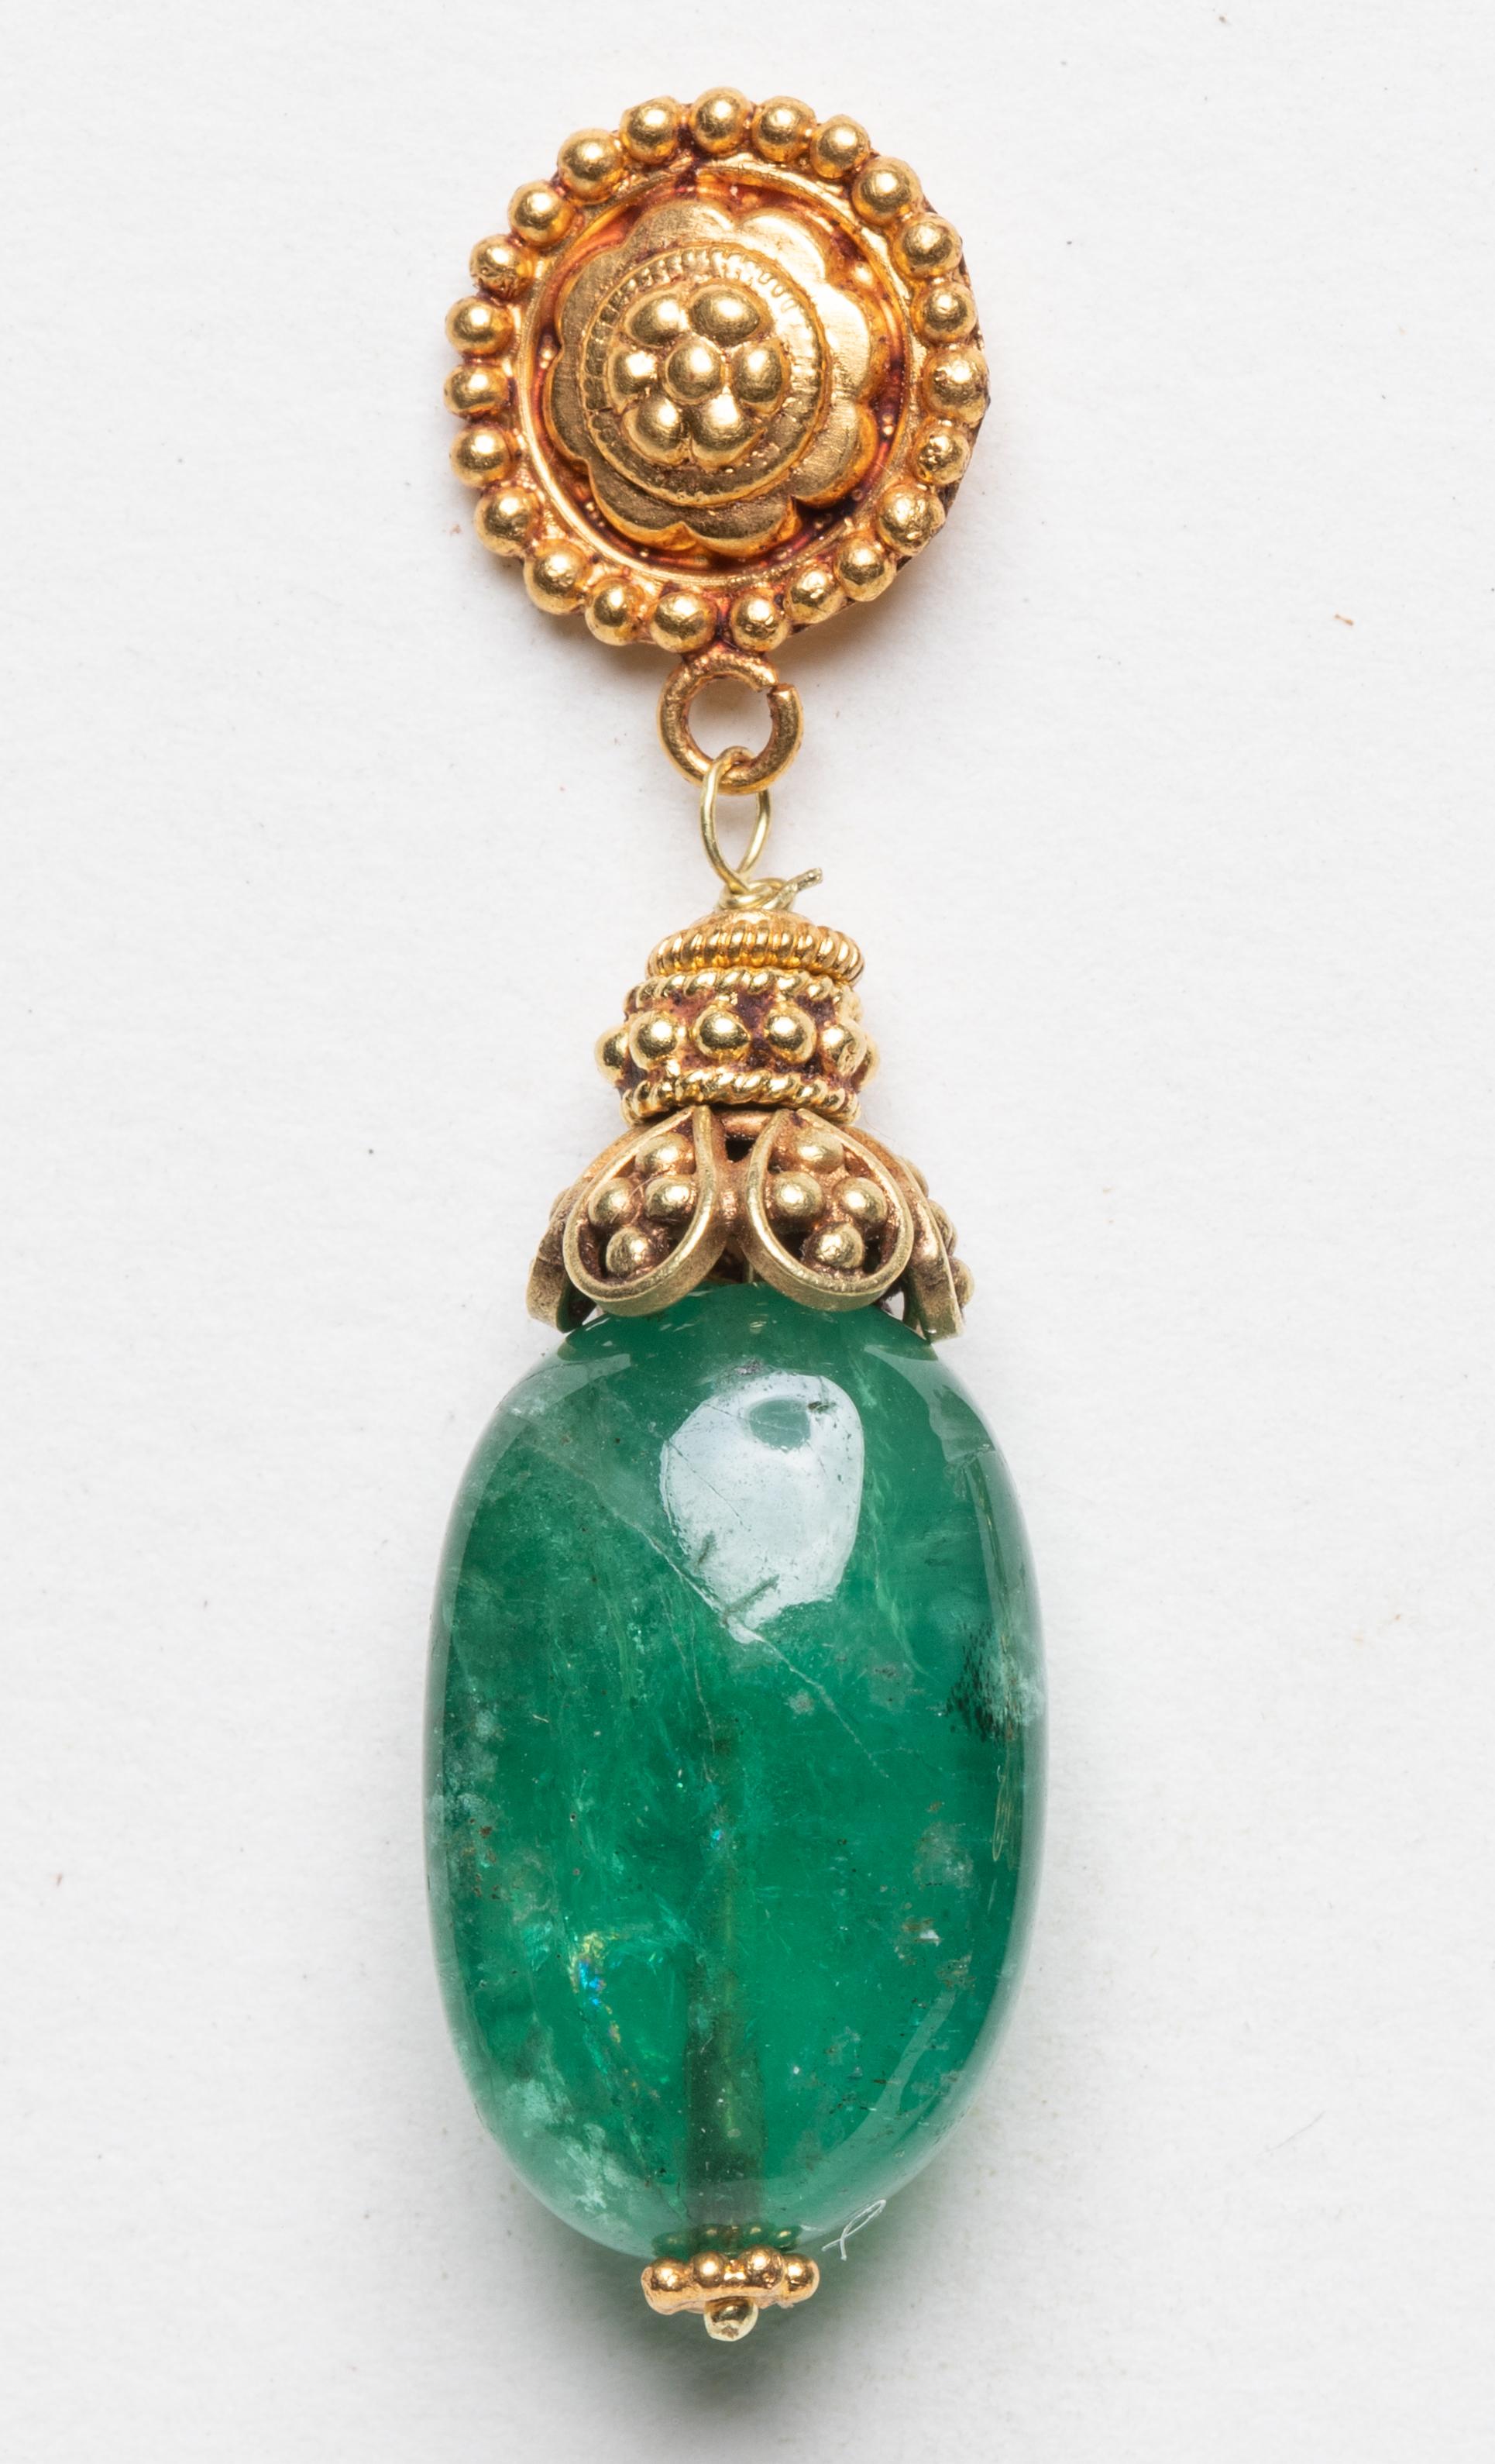 A pair of drop dangle earrings with large tumbled emeralds of excellent color.  The 22K gold work features fine granulation work on both the post and end cap.  For pierced ears.  Designed by Deborah Lockhart Phillips.